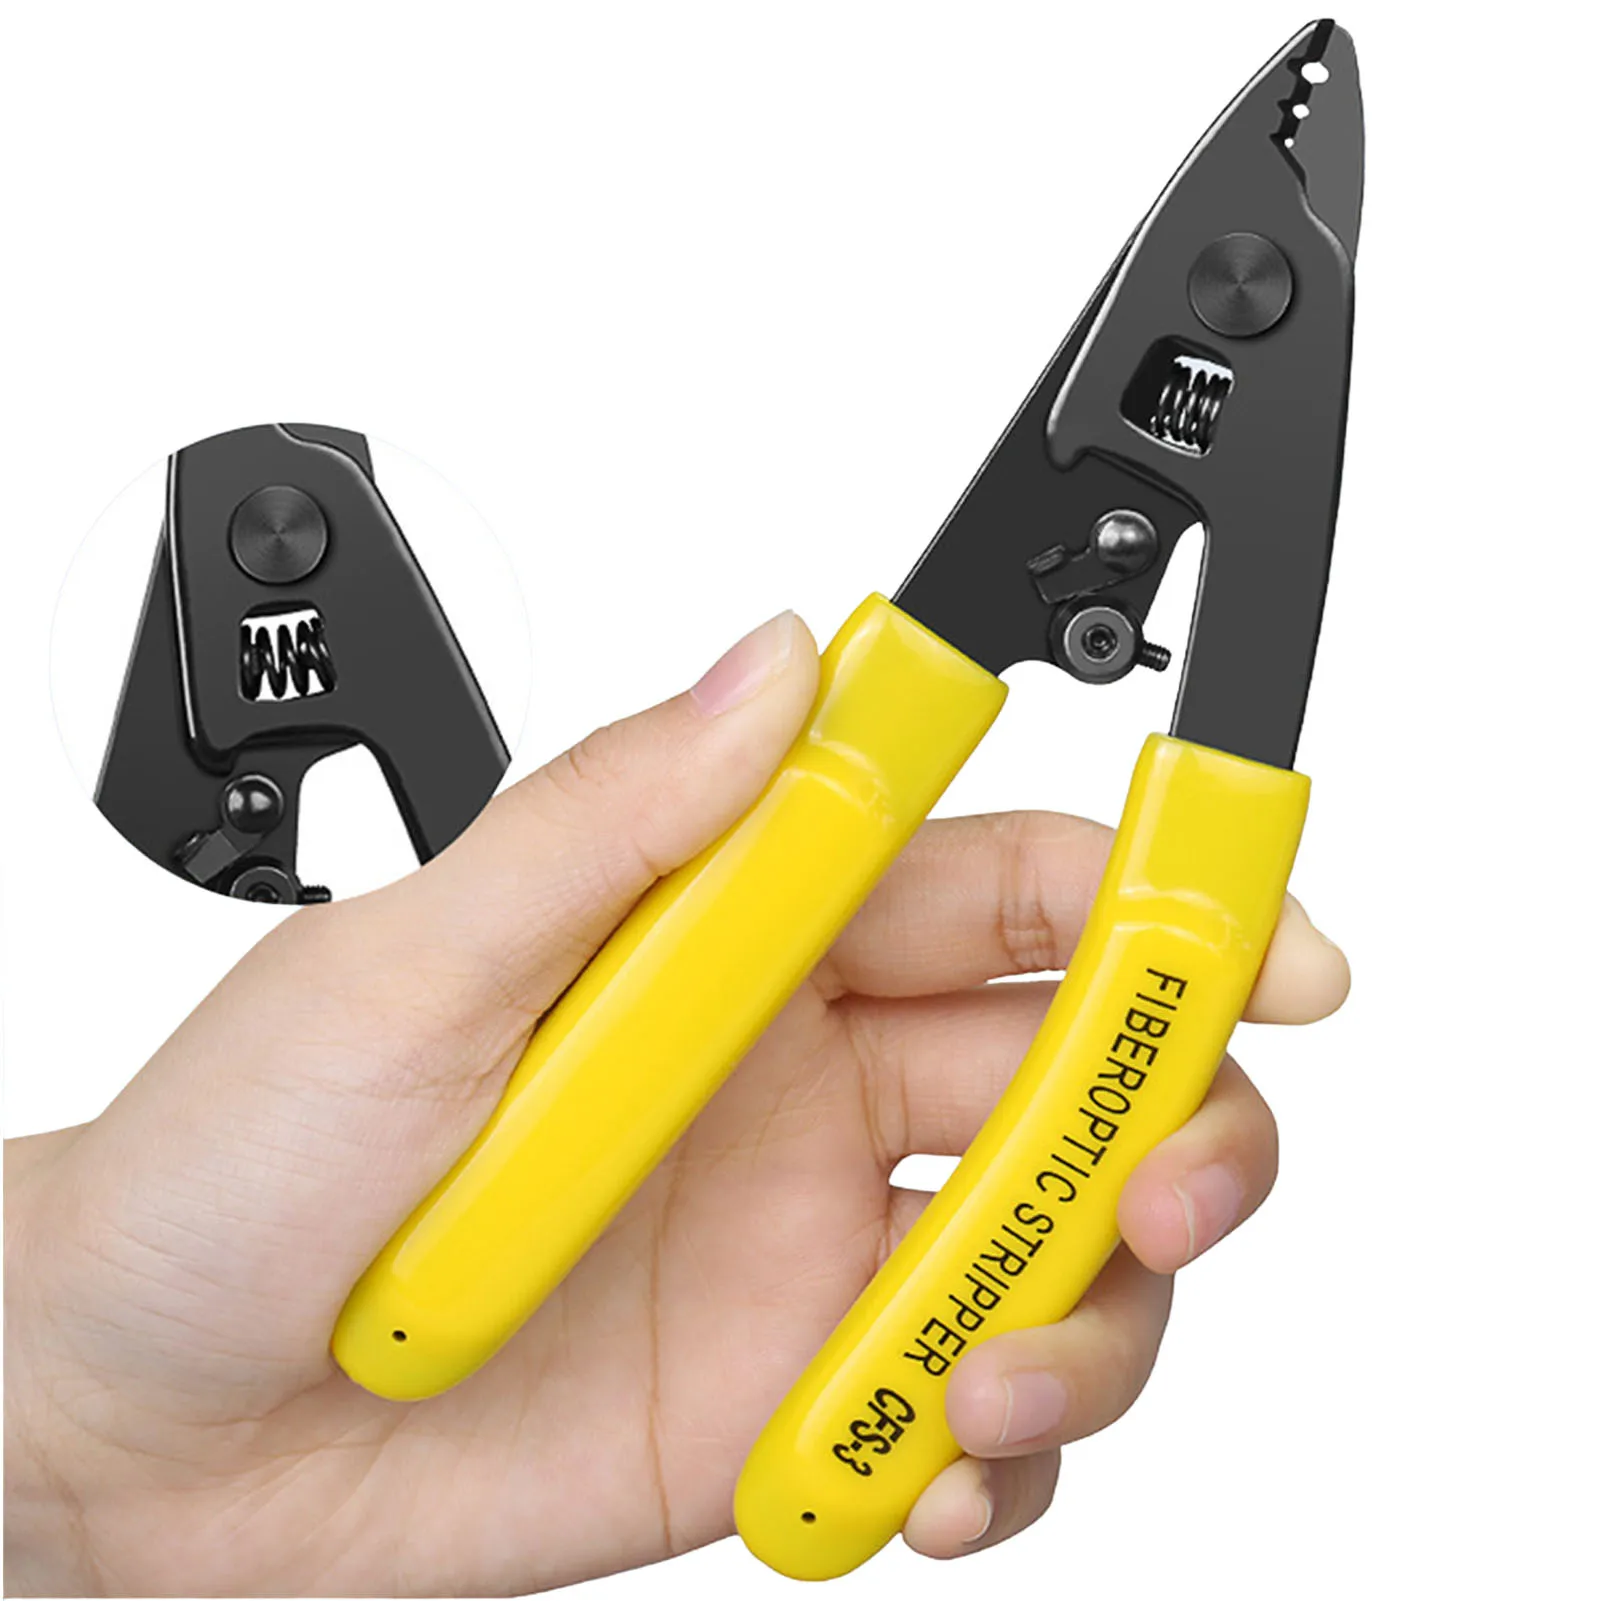 

Upgraded Fiber Optic Stripper Sturdy High Carbon Steel Material Pliers for Cable Stripping Tool